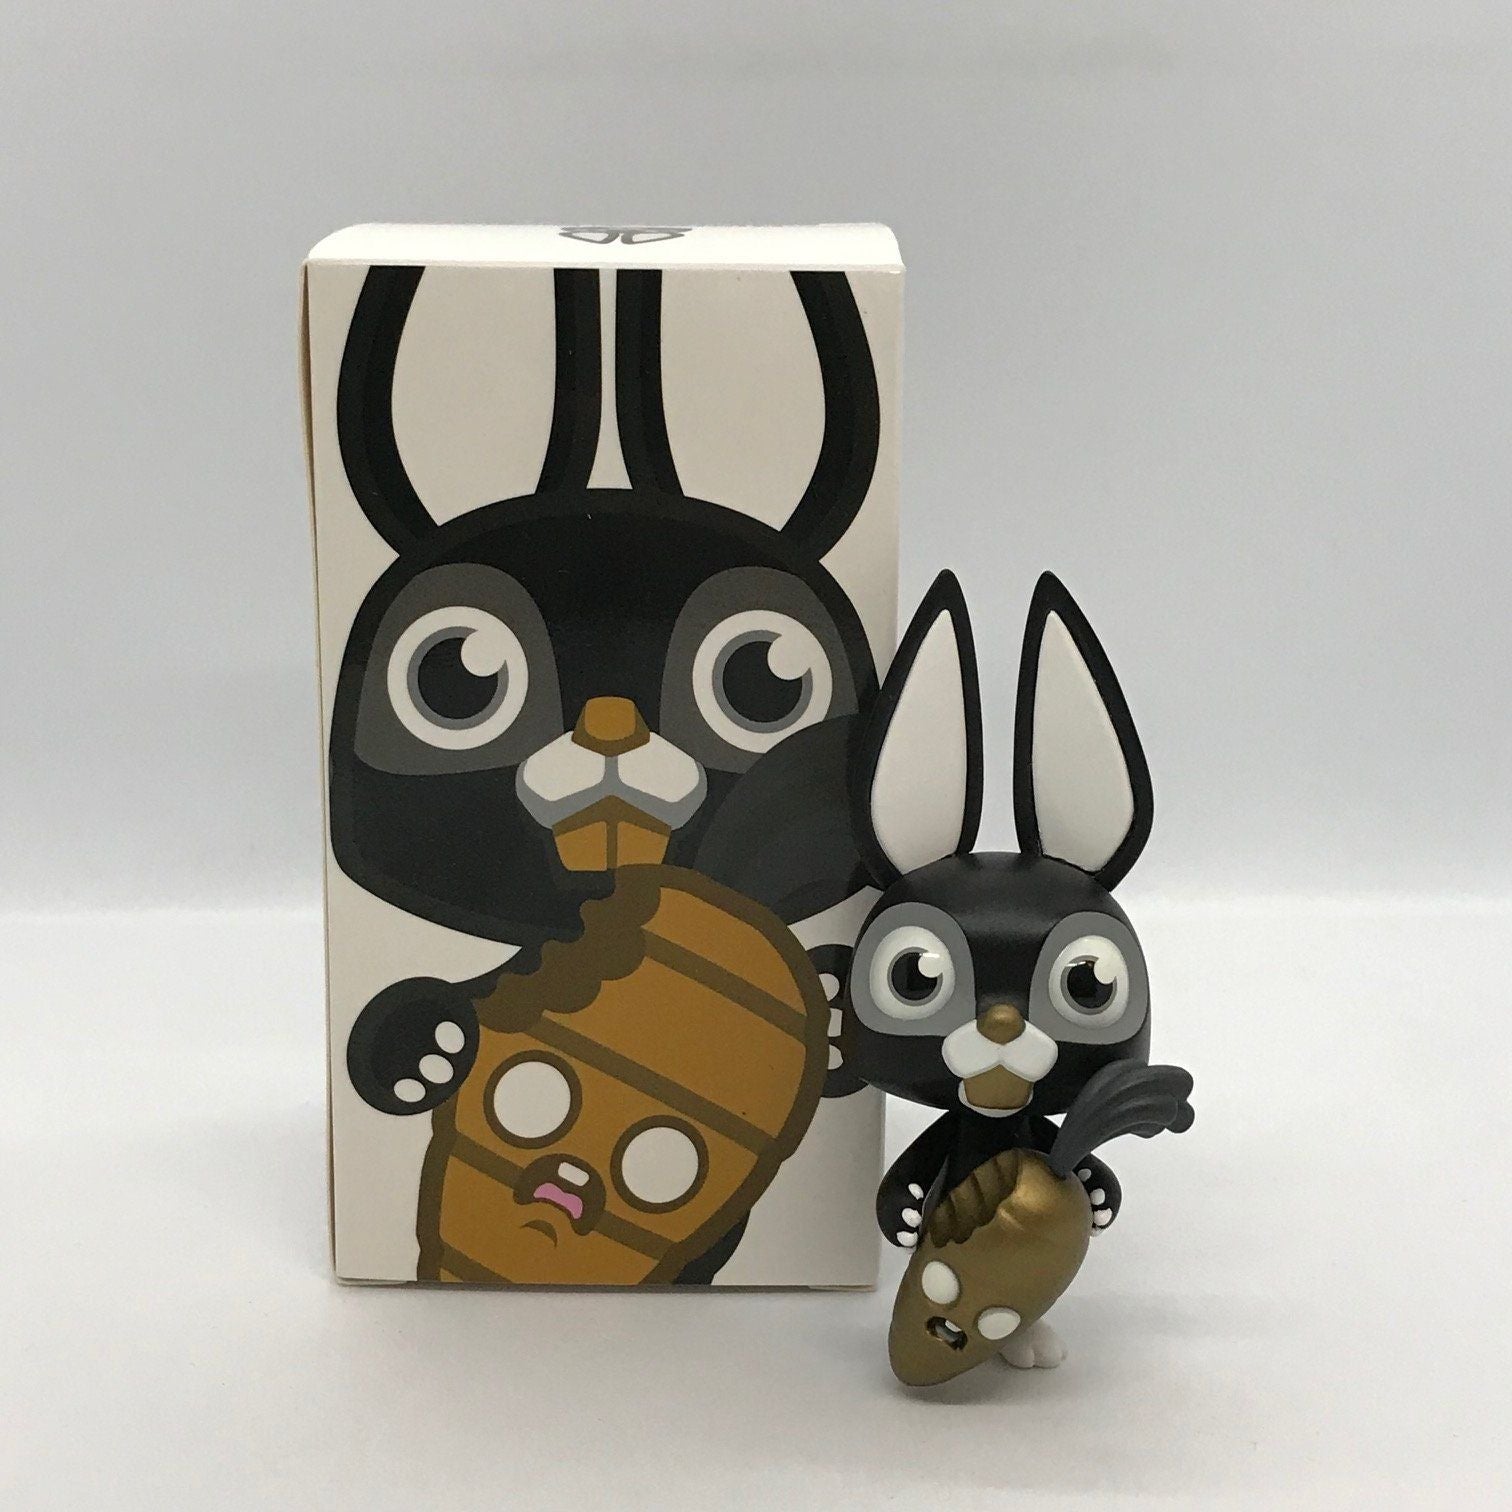 Coarse X Playhouse Nibble & Root Siam Blackout Edition 4-inch figure available now ! ! !